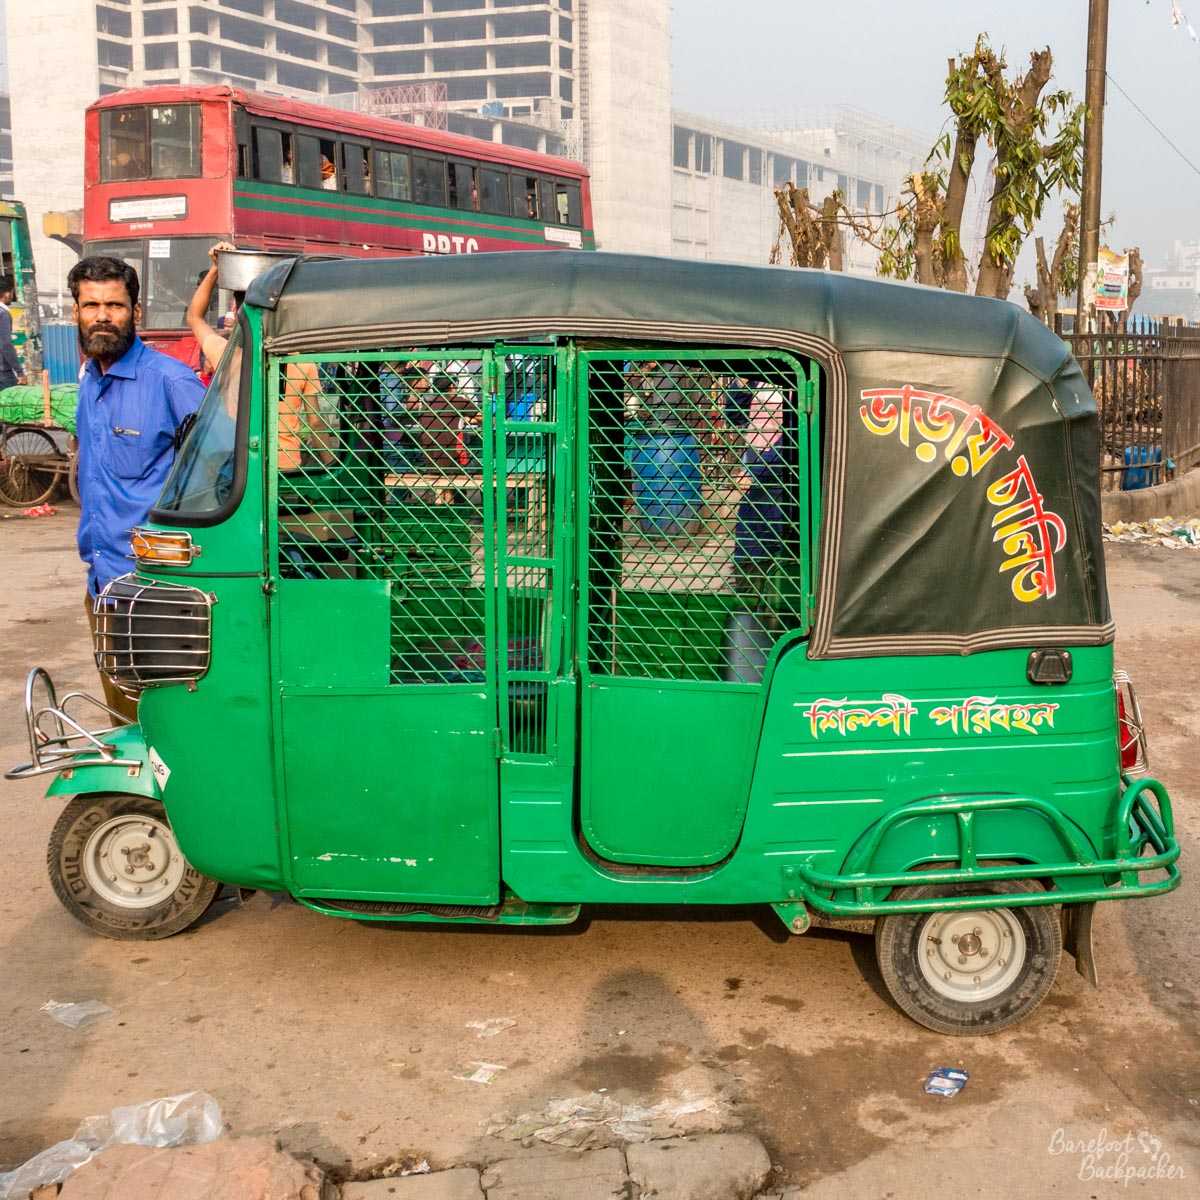 A CNG (gas-powered auto-rickshaw) in the parking bay at the Airport railway station in Dhaka, Bangladesh. It's basically a metal cage on wheels. The standard method of travel across the city. Scary af!